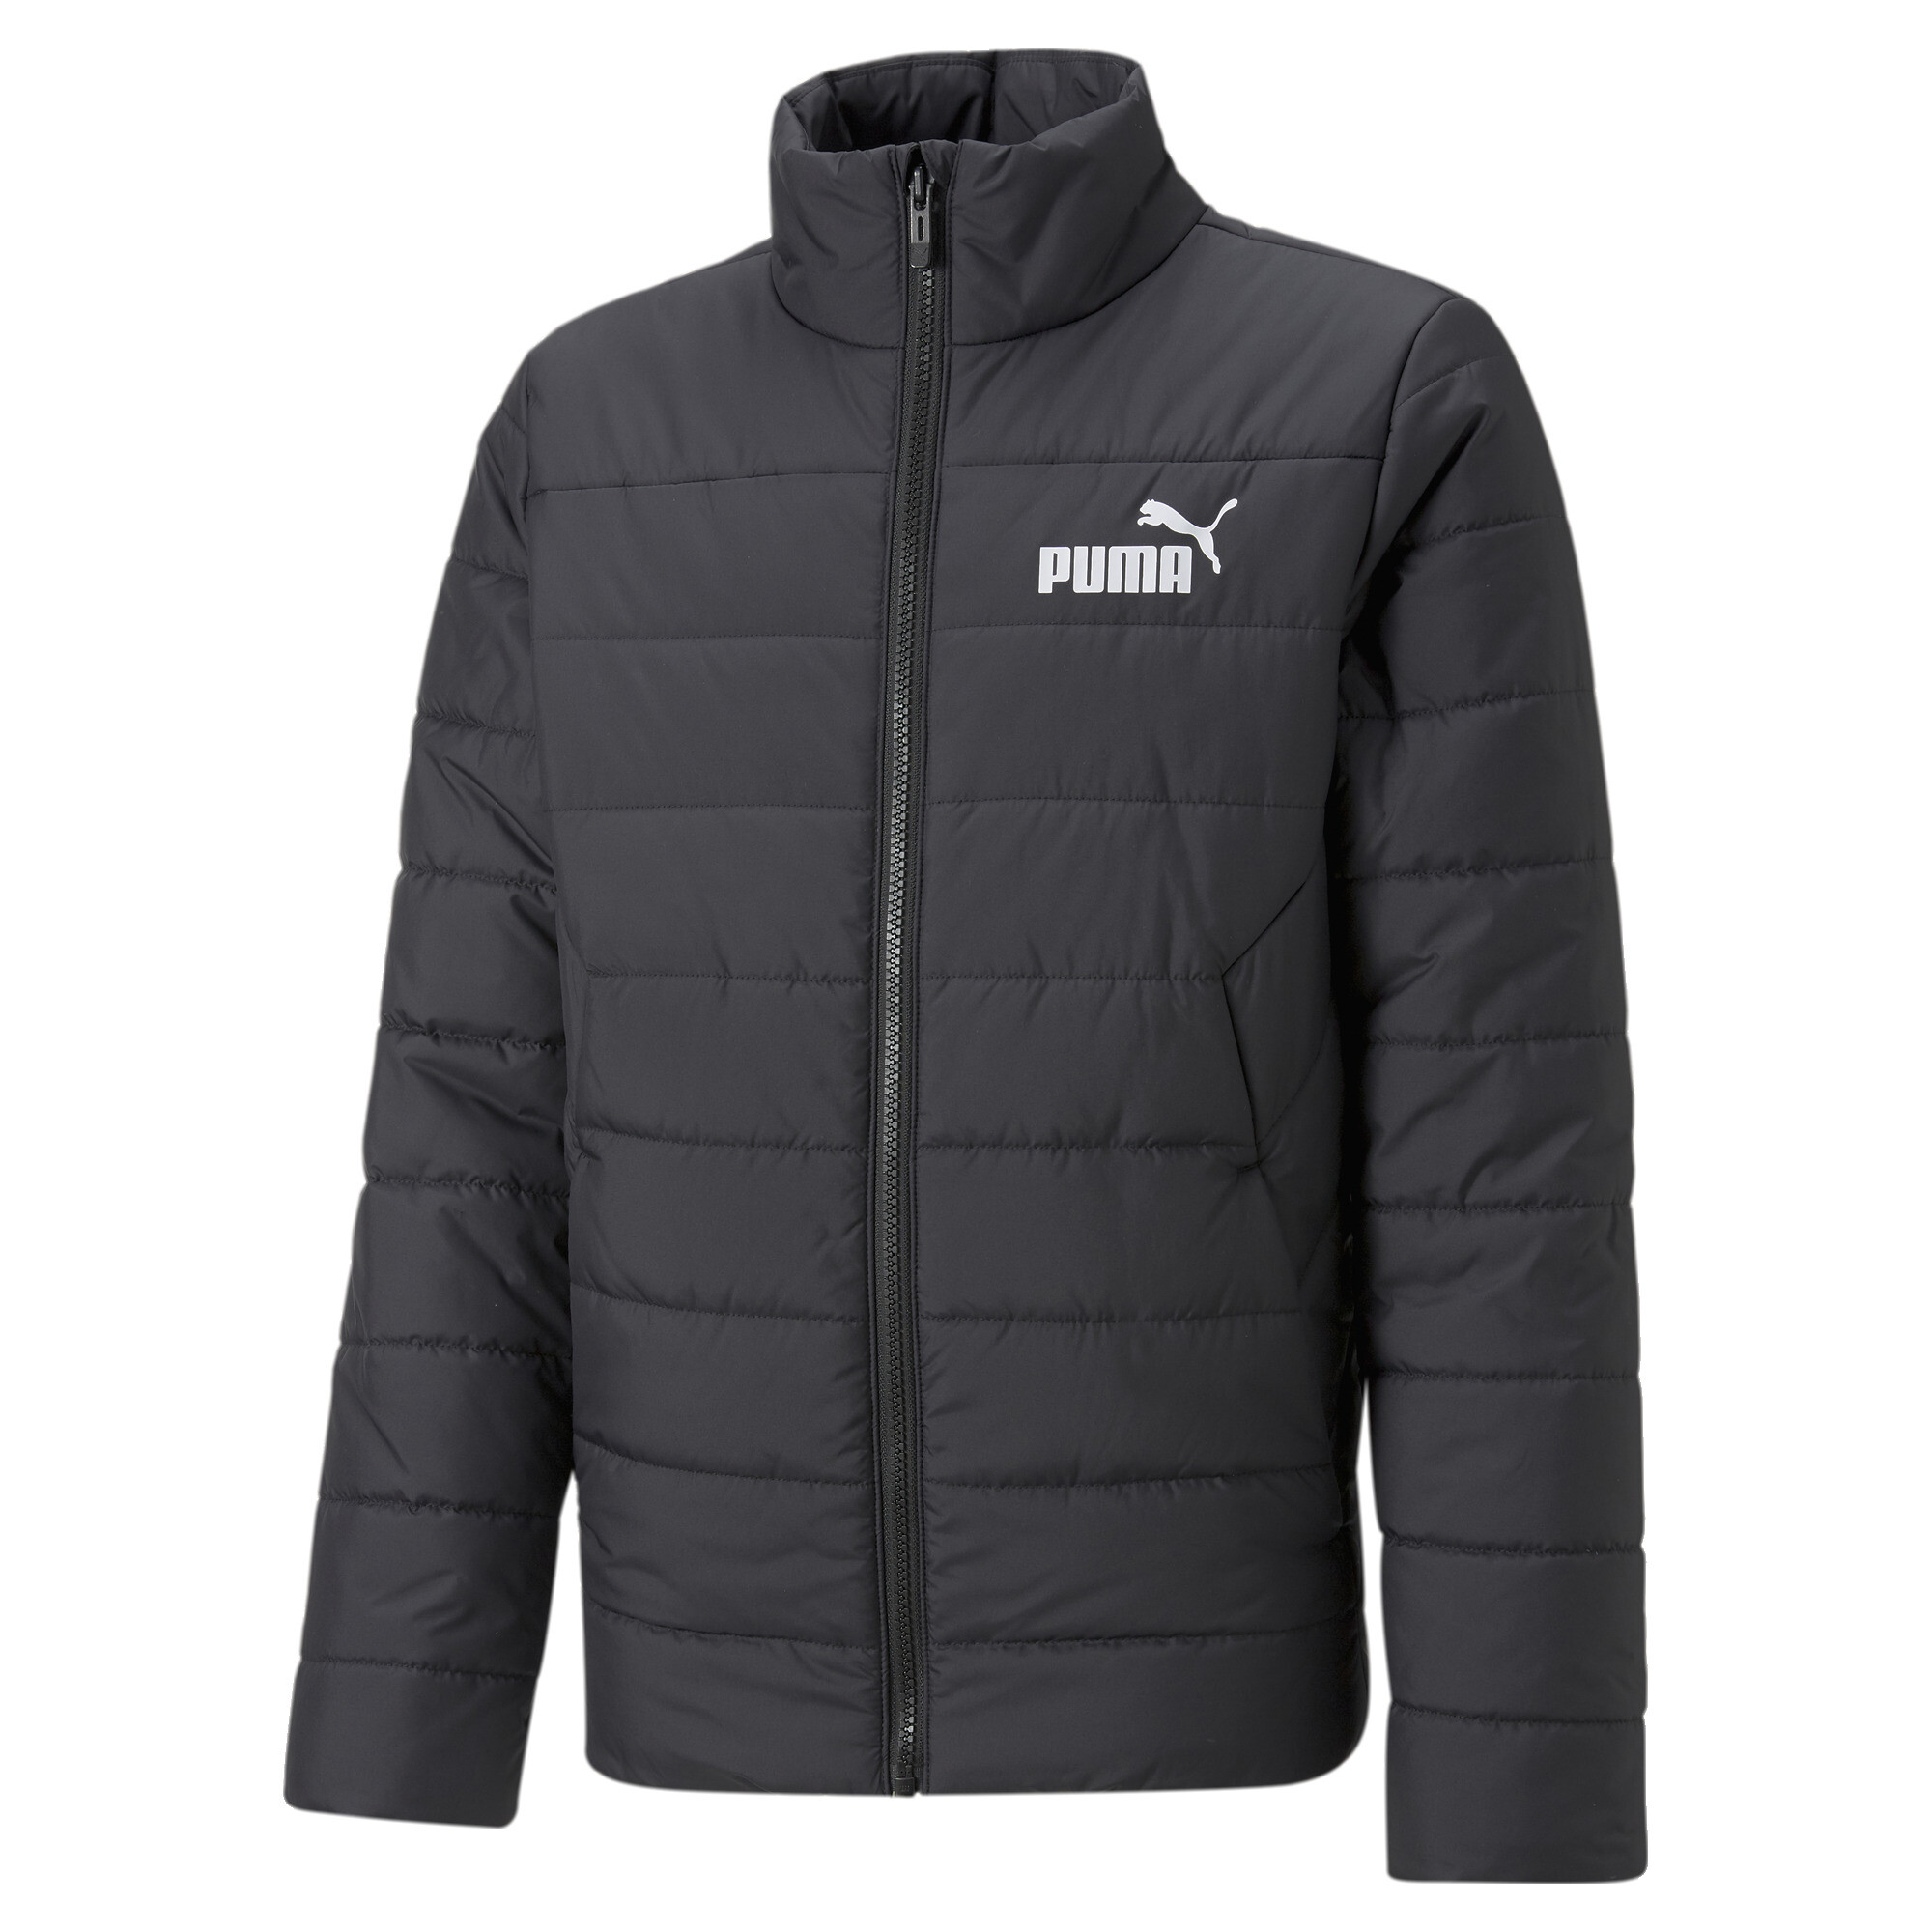 PUMA Essentials Padded Jacket In Black, Size 5-6 Youth